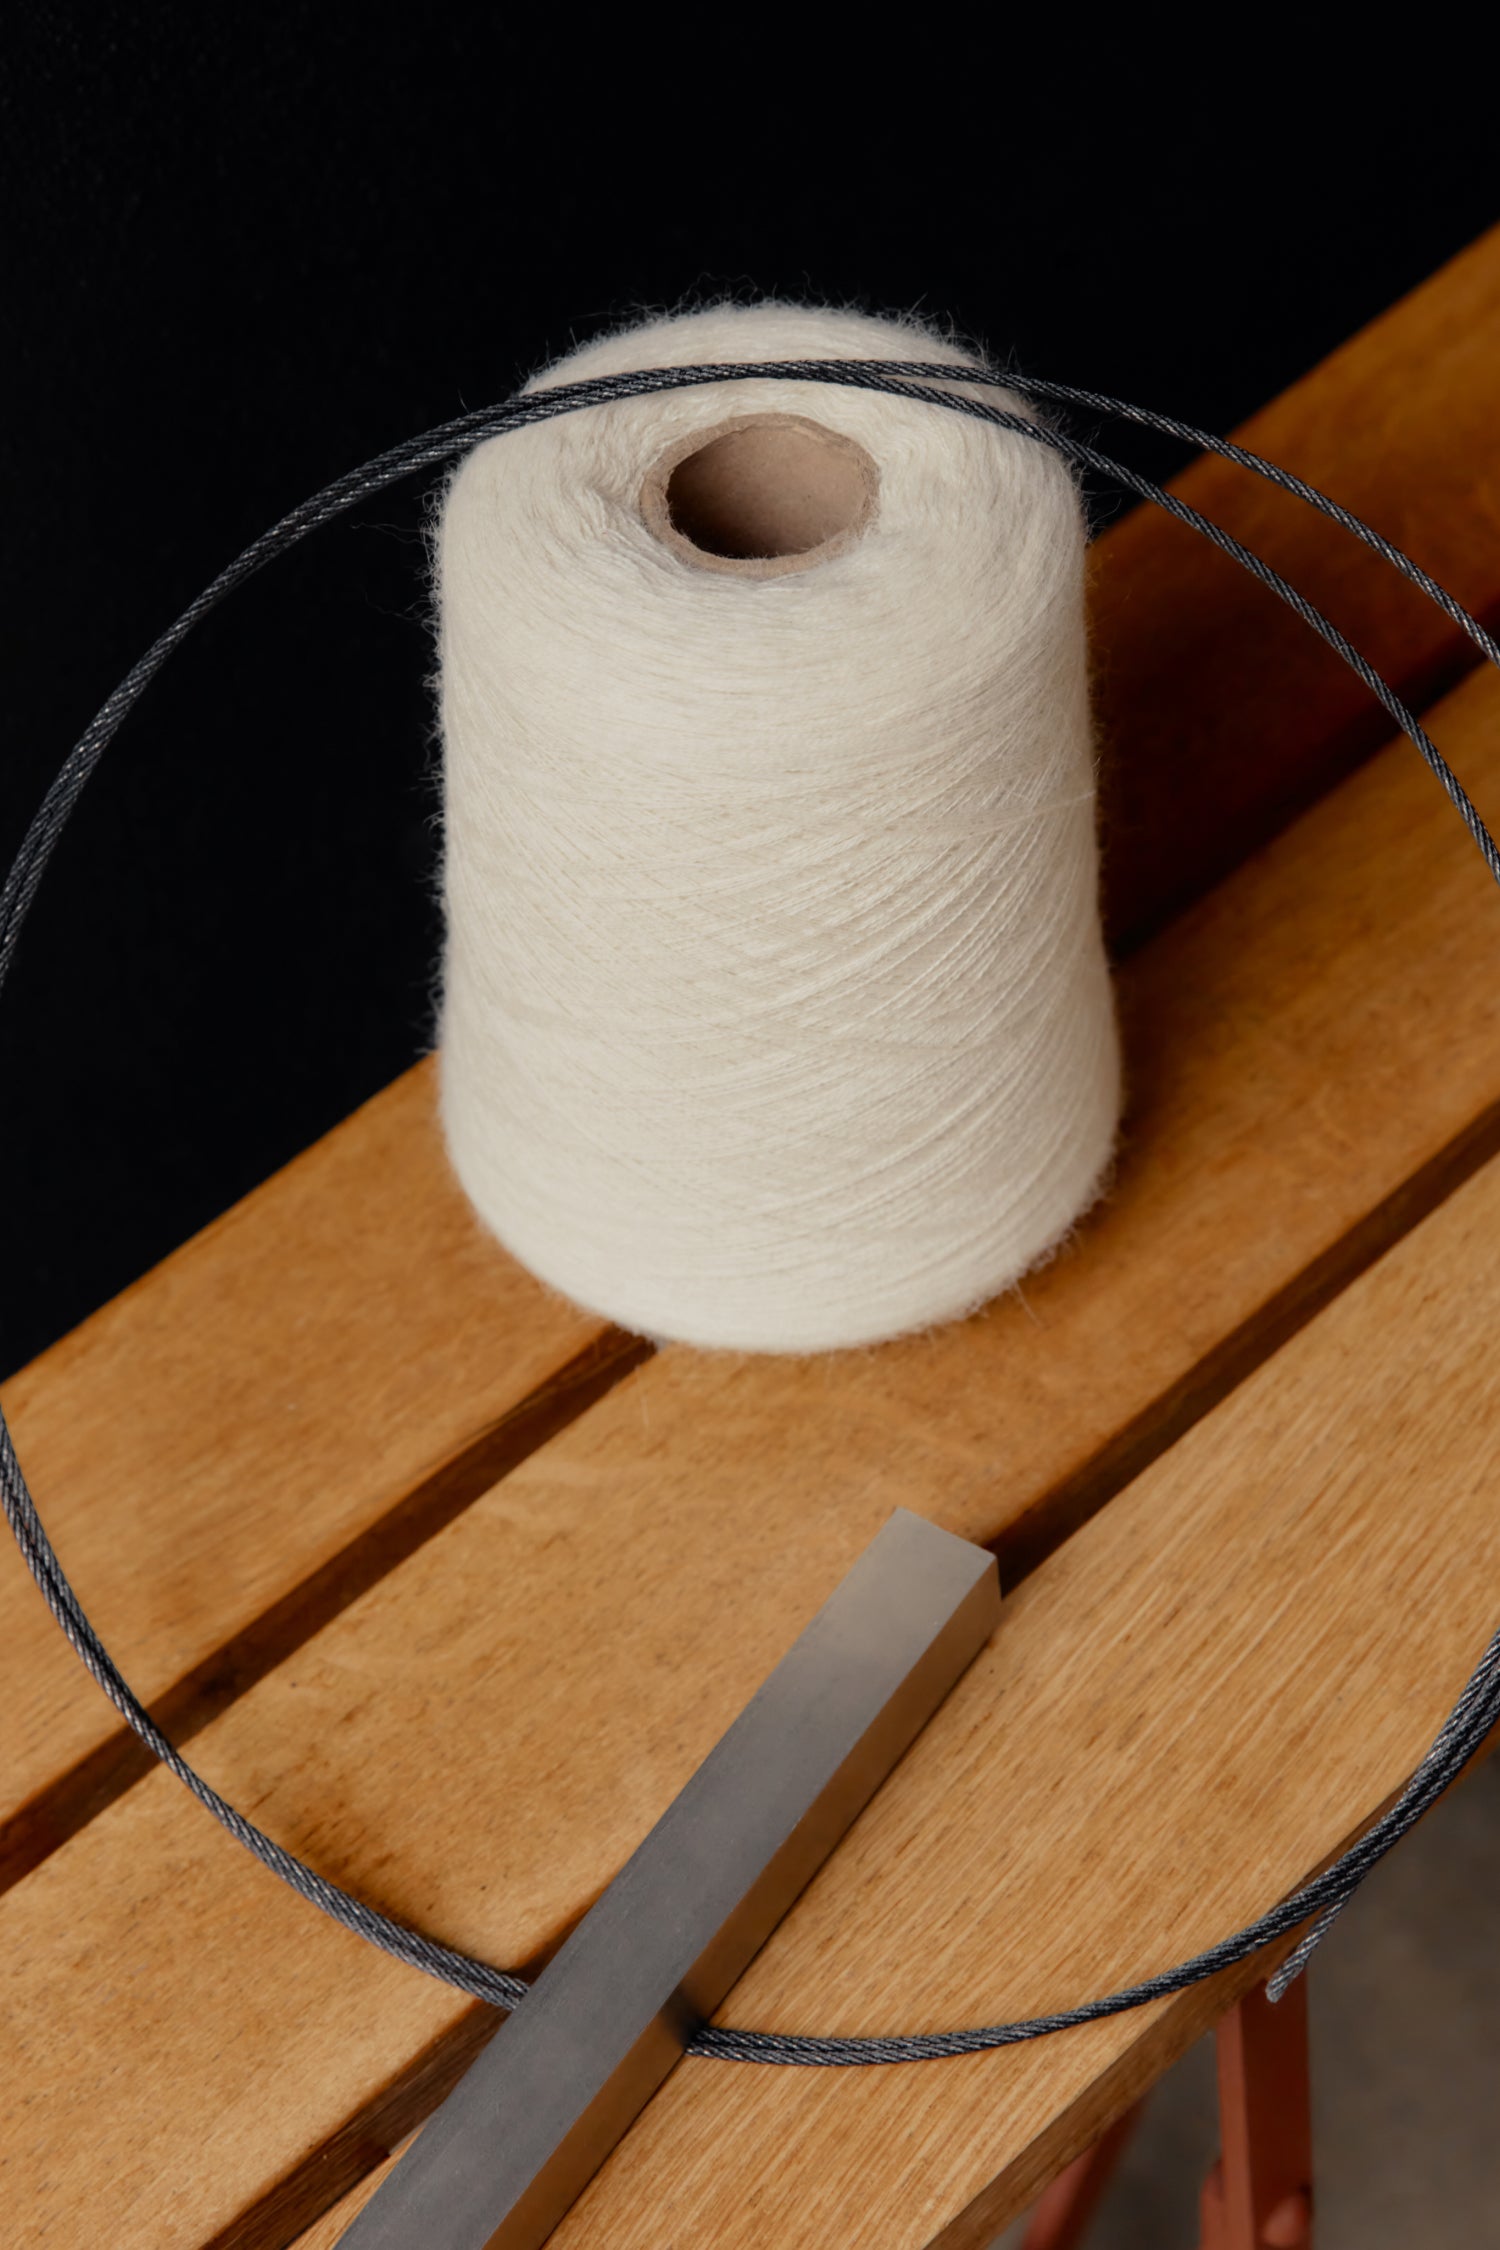 Yarn spool on a wooden chair with a metal rod and string looped around it.